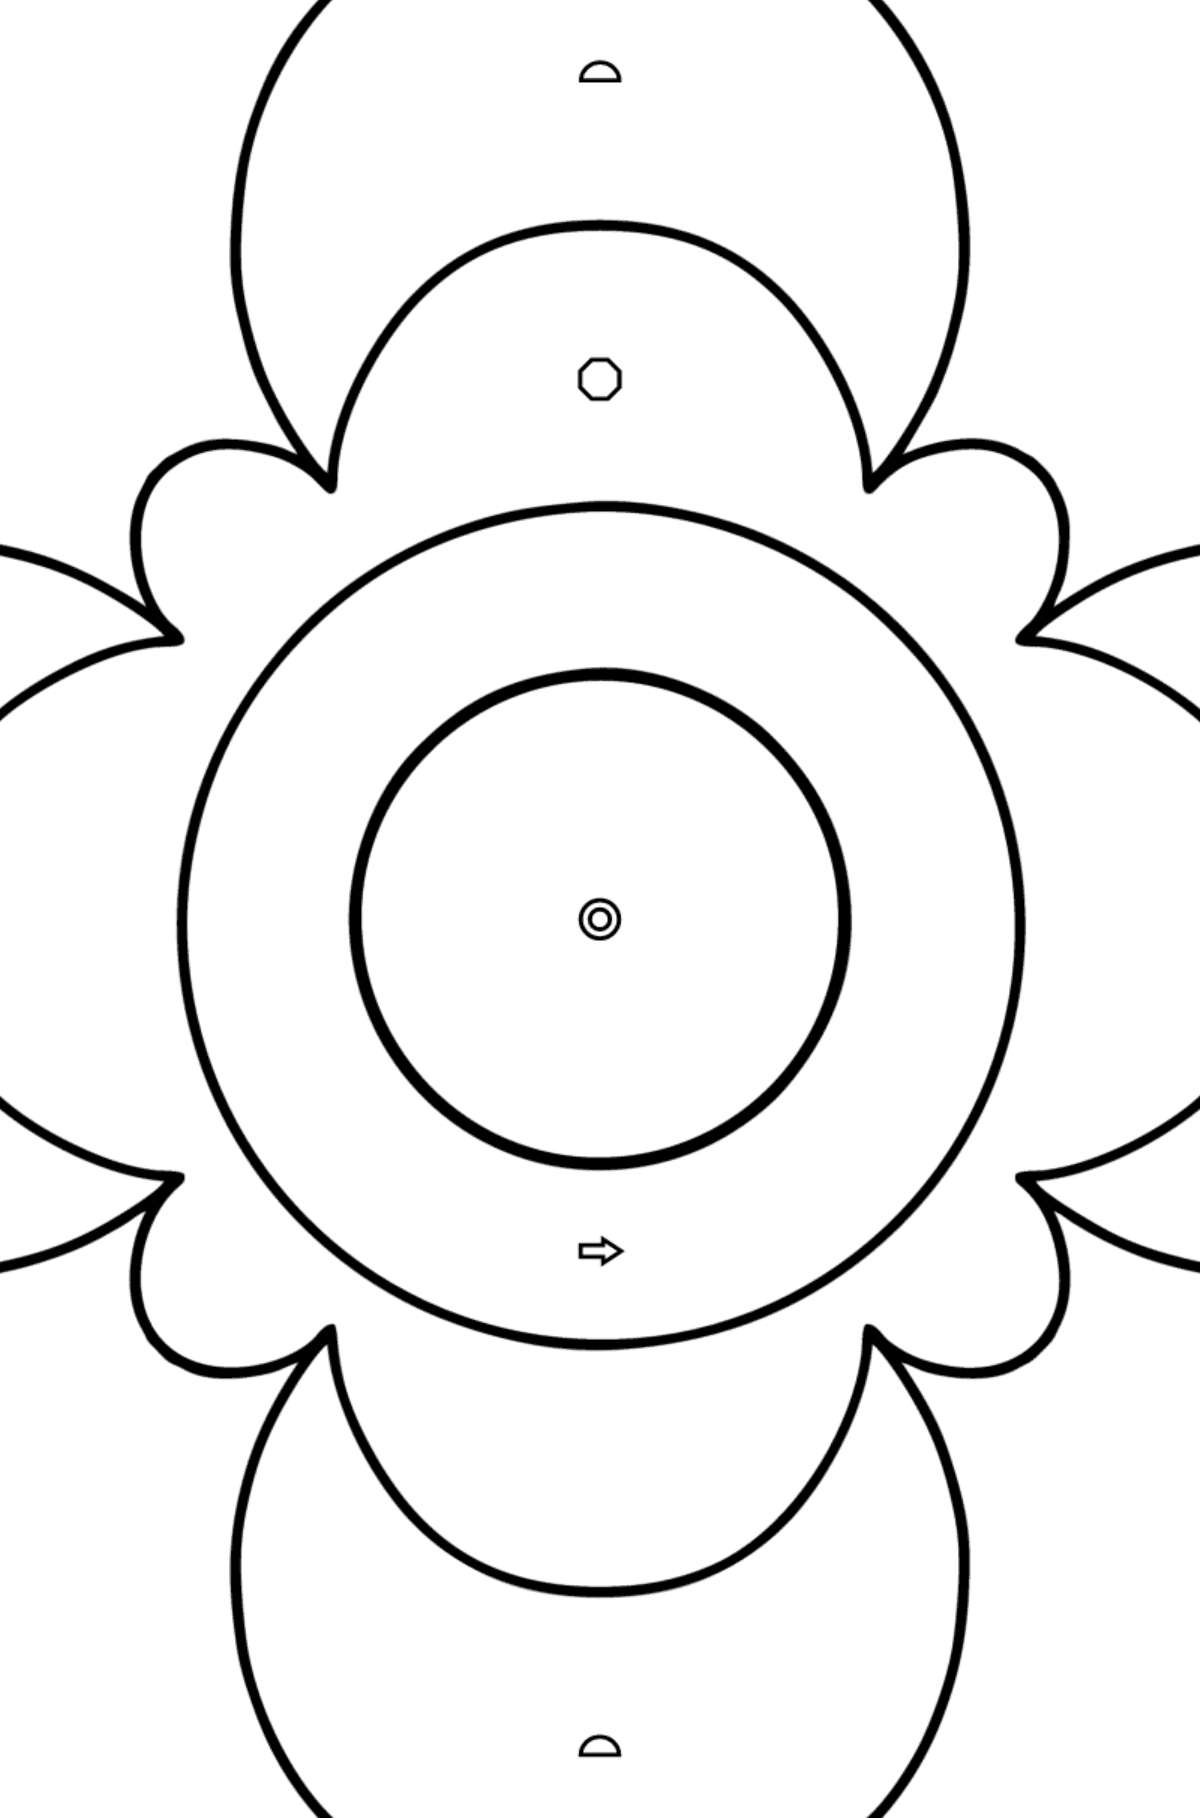 Coloring Anti stress flower for kids - Coloring by Geometric Shapes for Kids